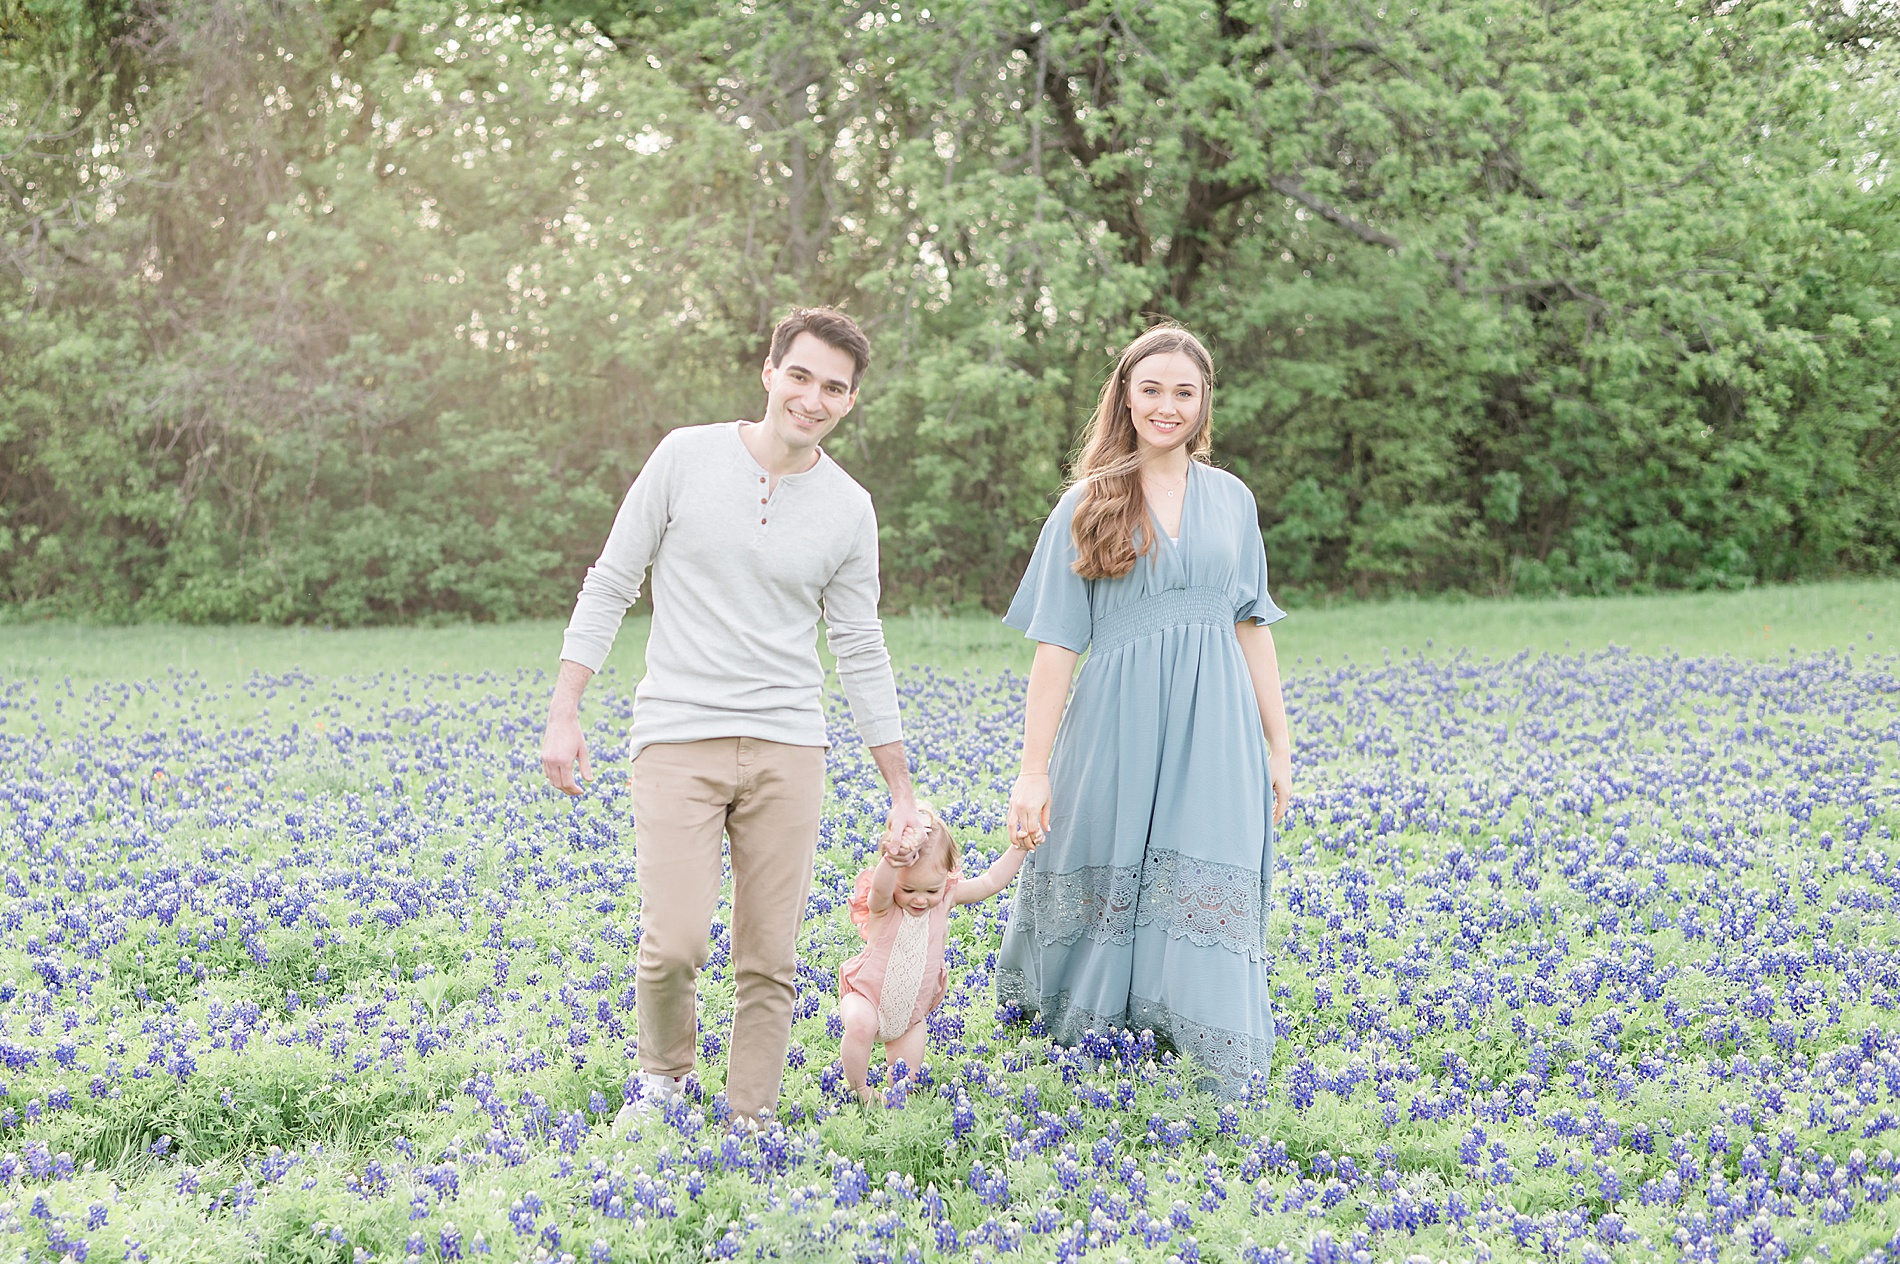 family of three hold hands as they walk through field of bluebonnets in Dallas TX photographed by Lindsey Dutton Photography, a Dallas family photographer